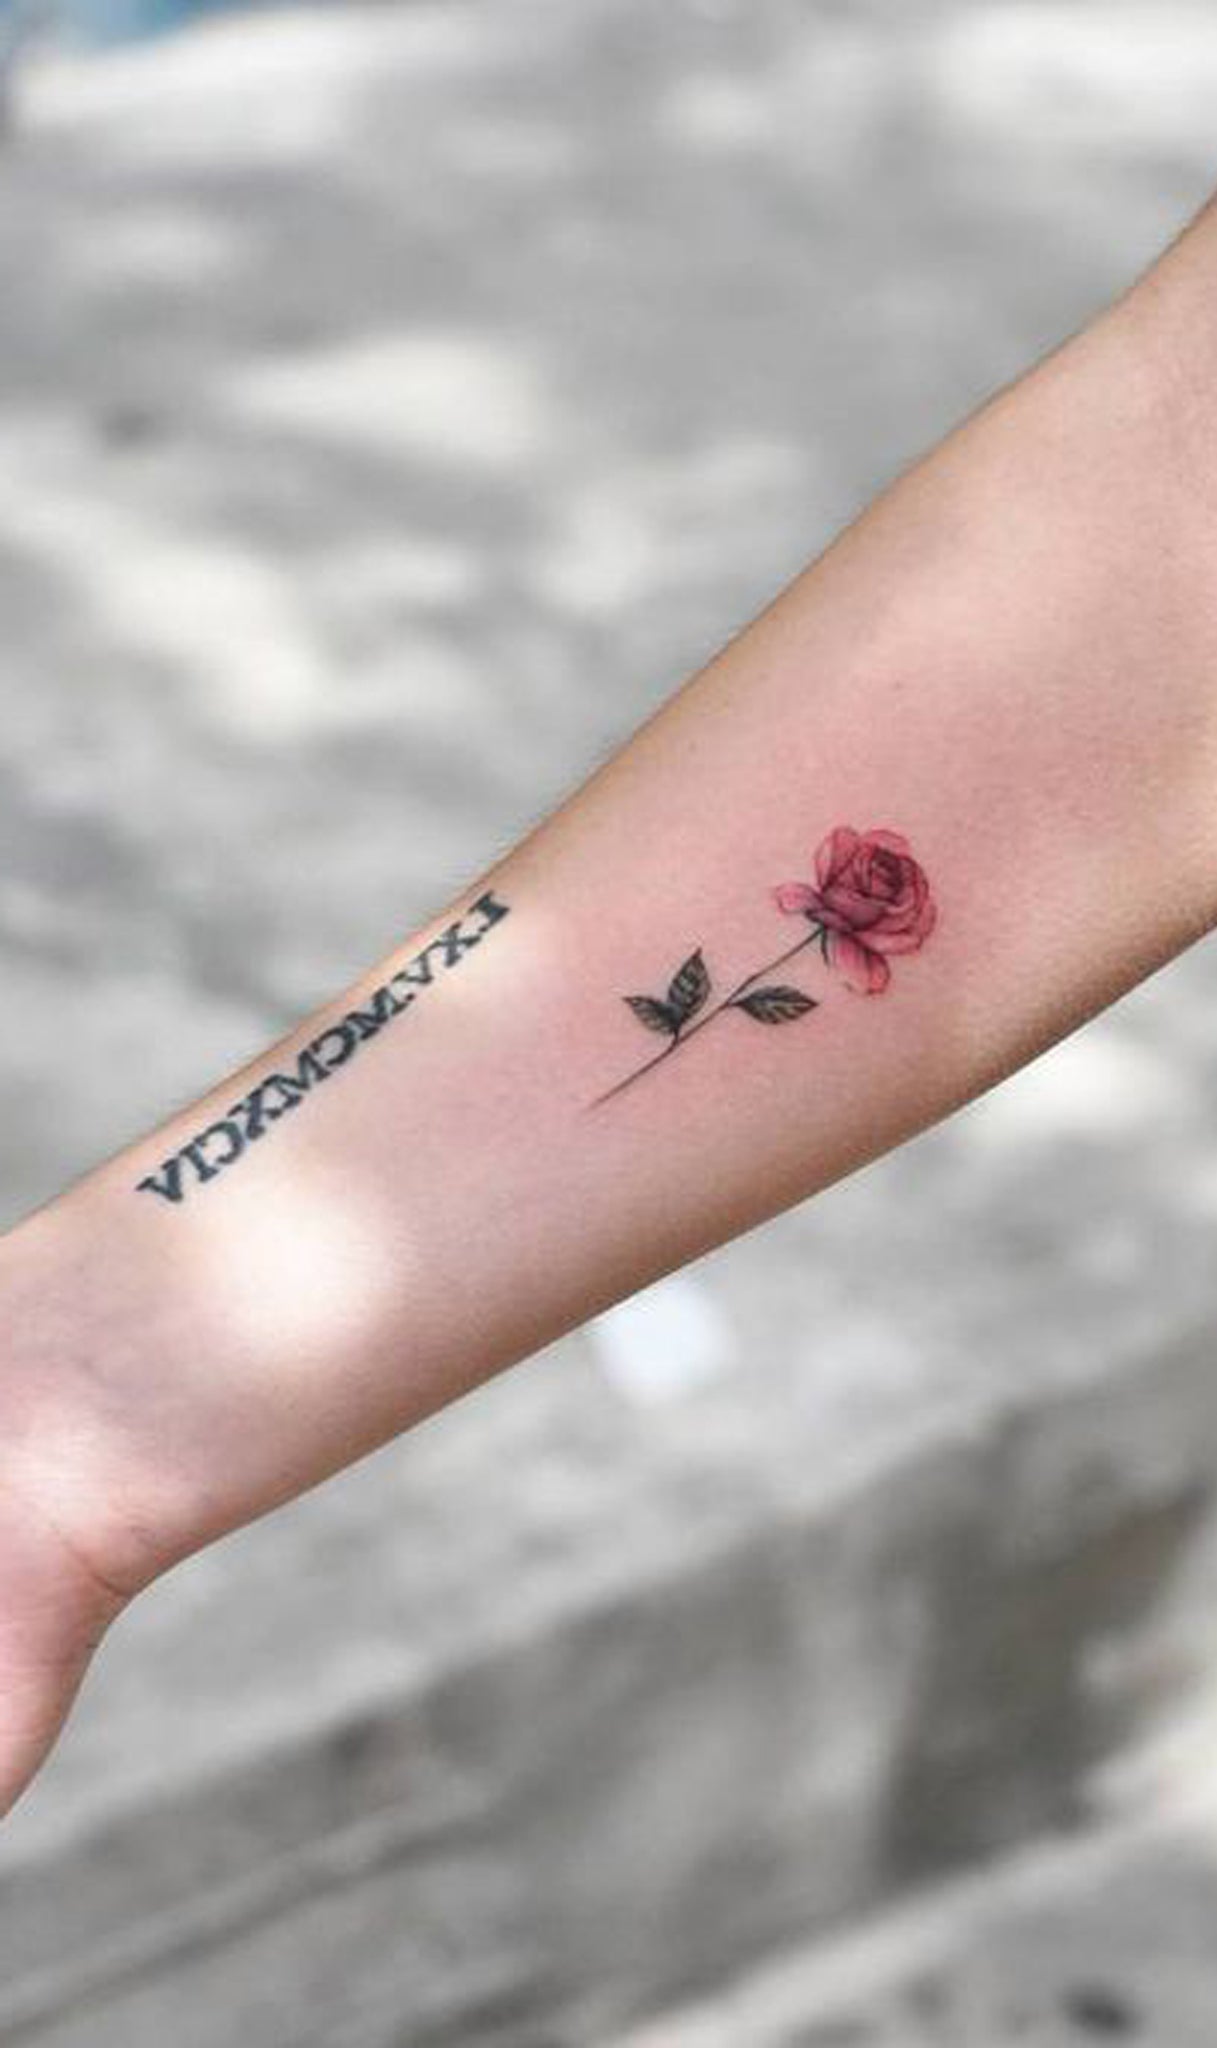 30+ Simple and Small Flower Tattoos Ideas for Women ...